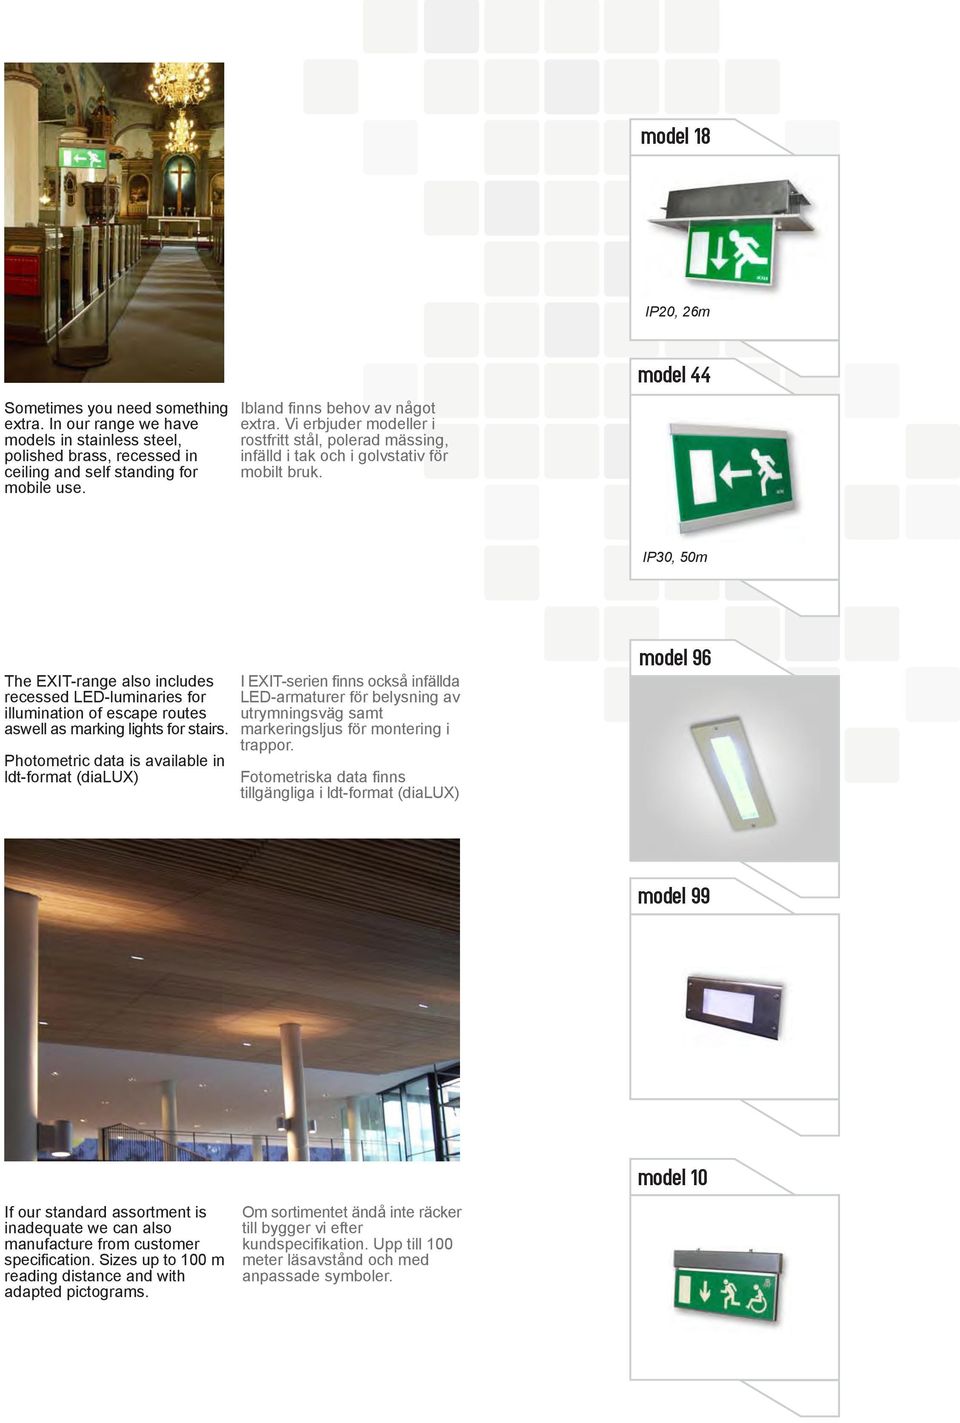 model 44 IP30, 50m The EXIT-range also includes recessed LED-luminaries for illumination of escape routes aswell as marking lights for stairs.